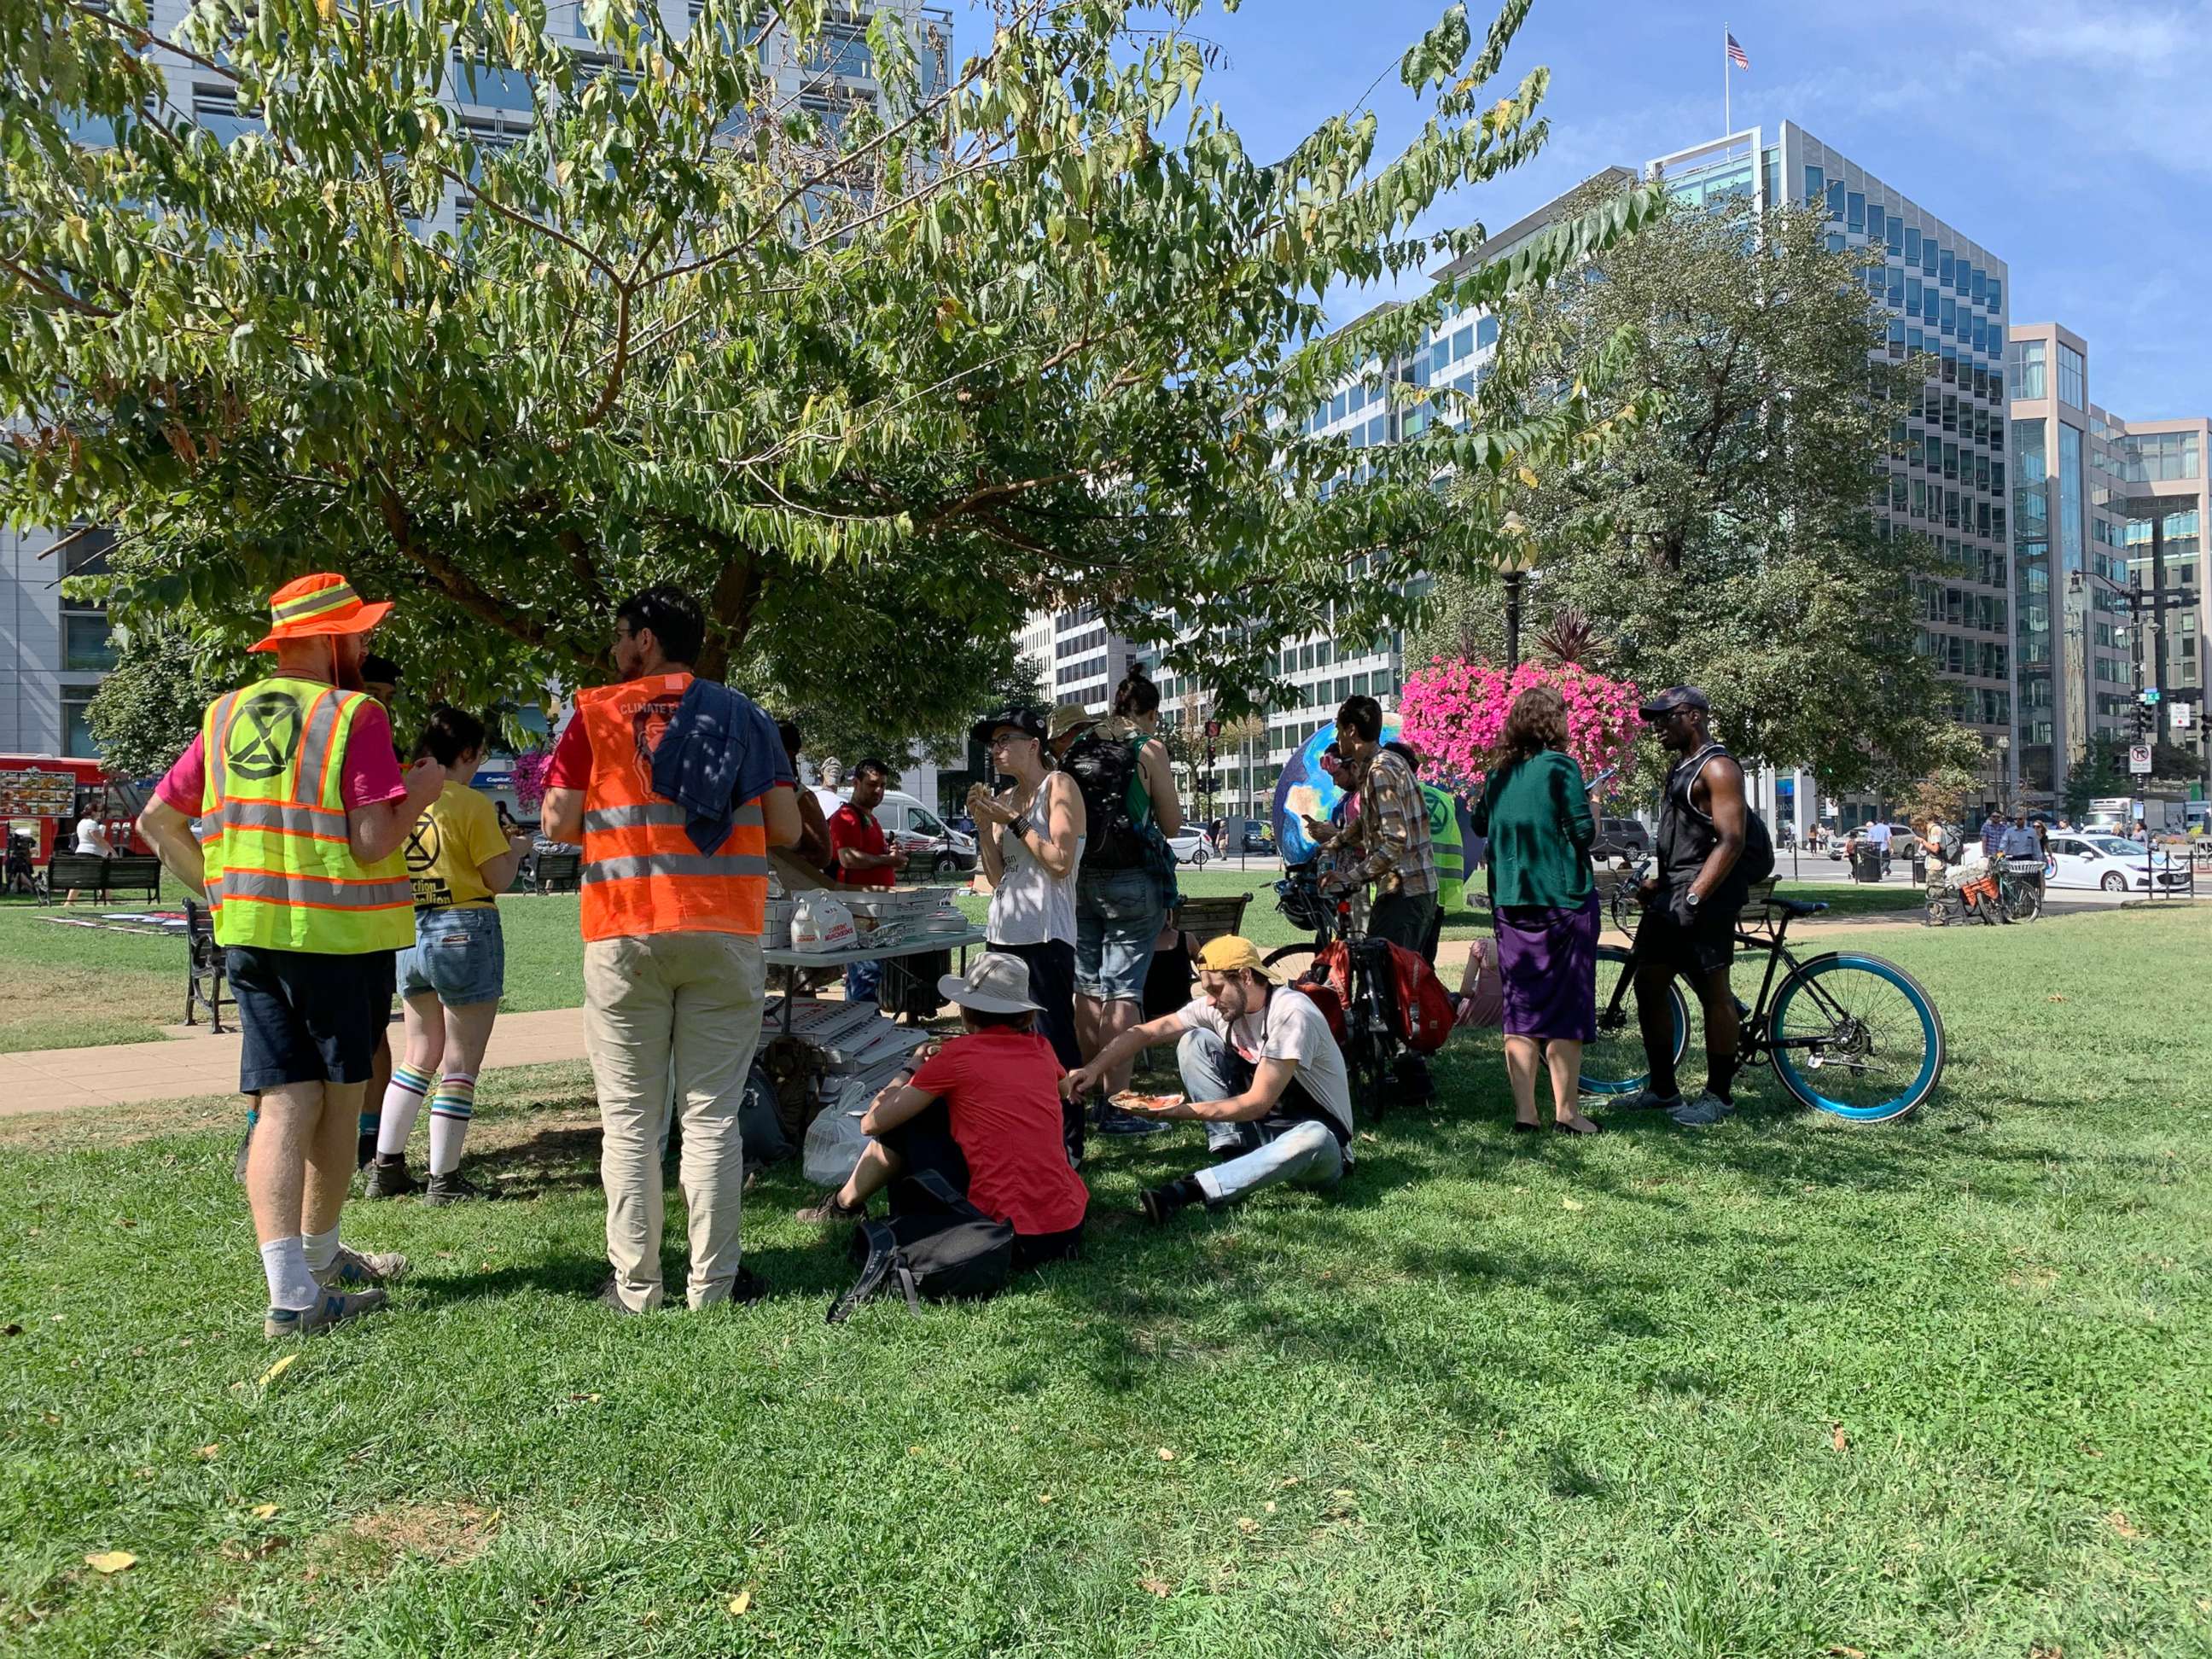 PHOTO: Climate change activists ate pizza after their protest finished in Washington on September 23rd, 2019. Some of the boxes were thrown away in trash cans.